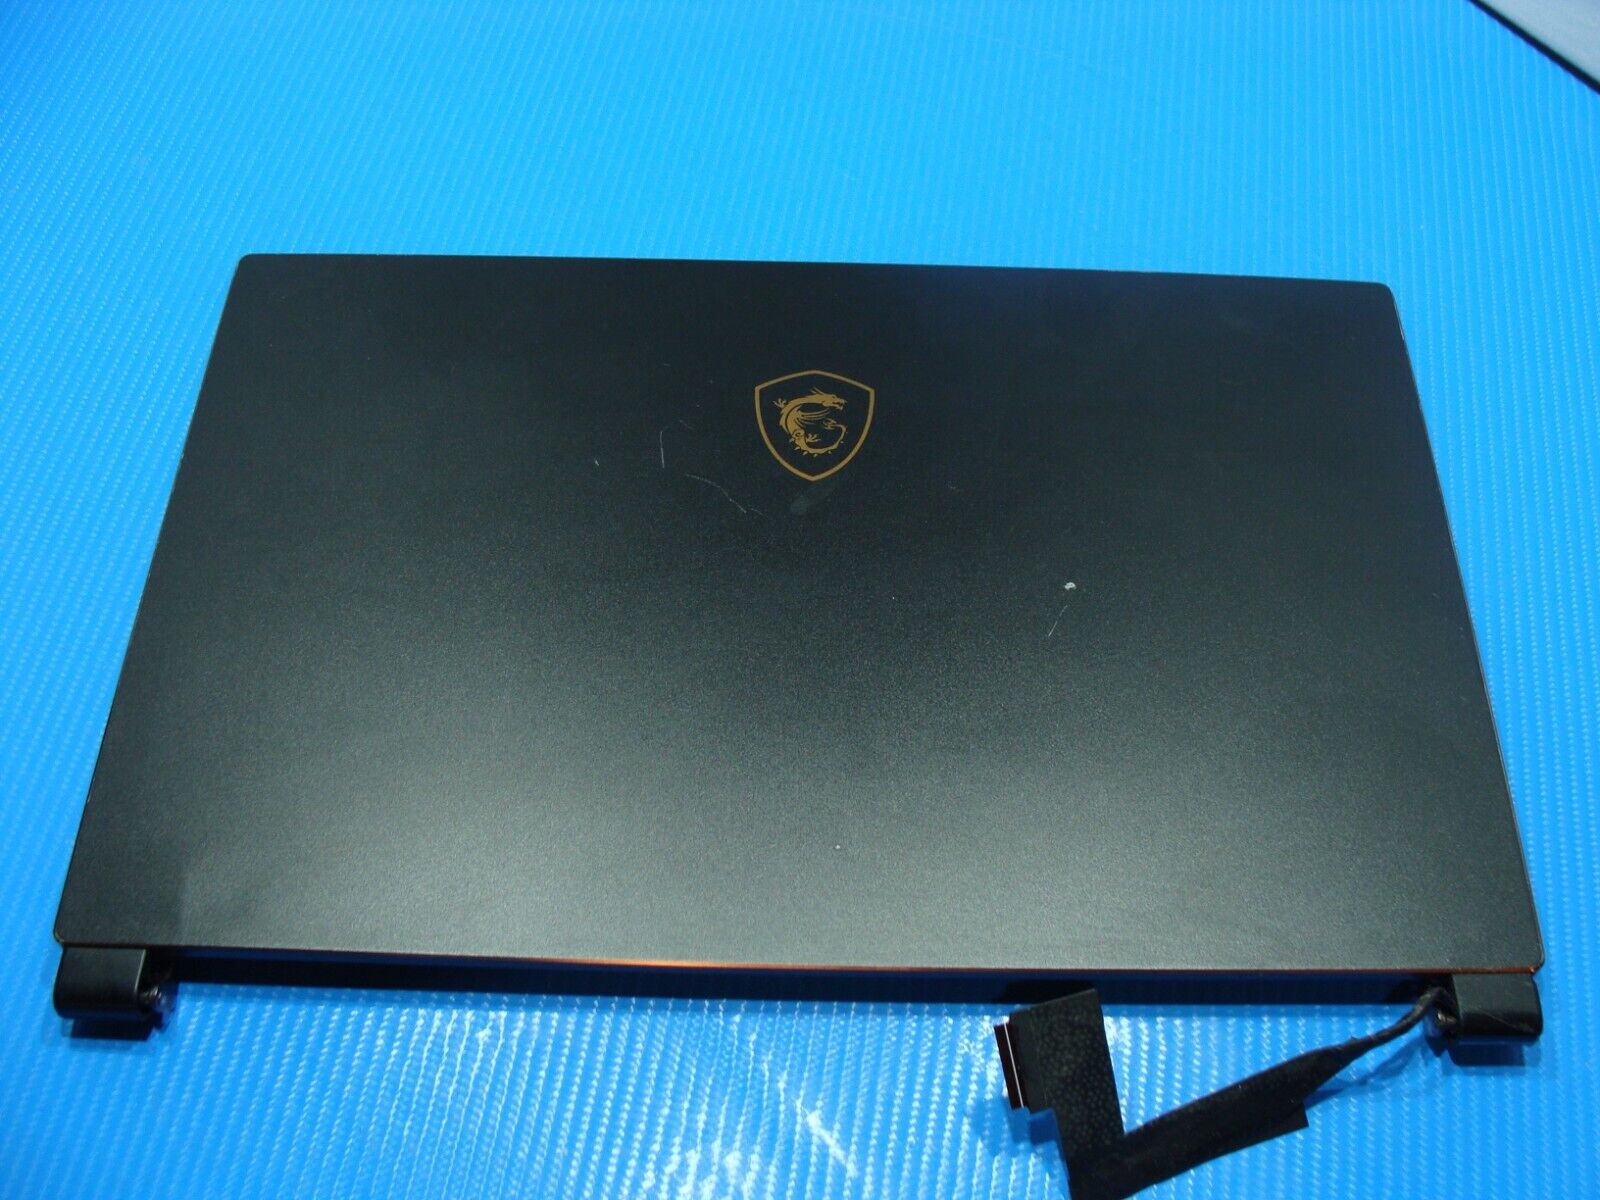 MSI GS65 Steatlh Thin Review  Lean Mean Fighting Machine